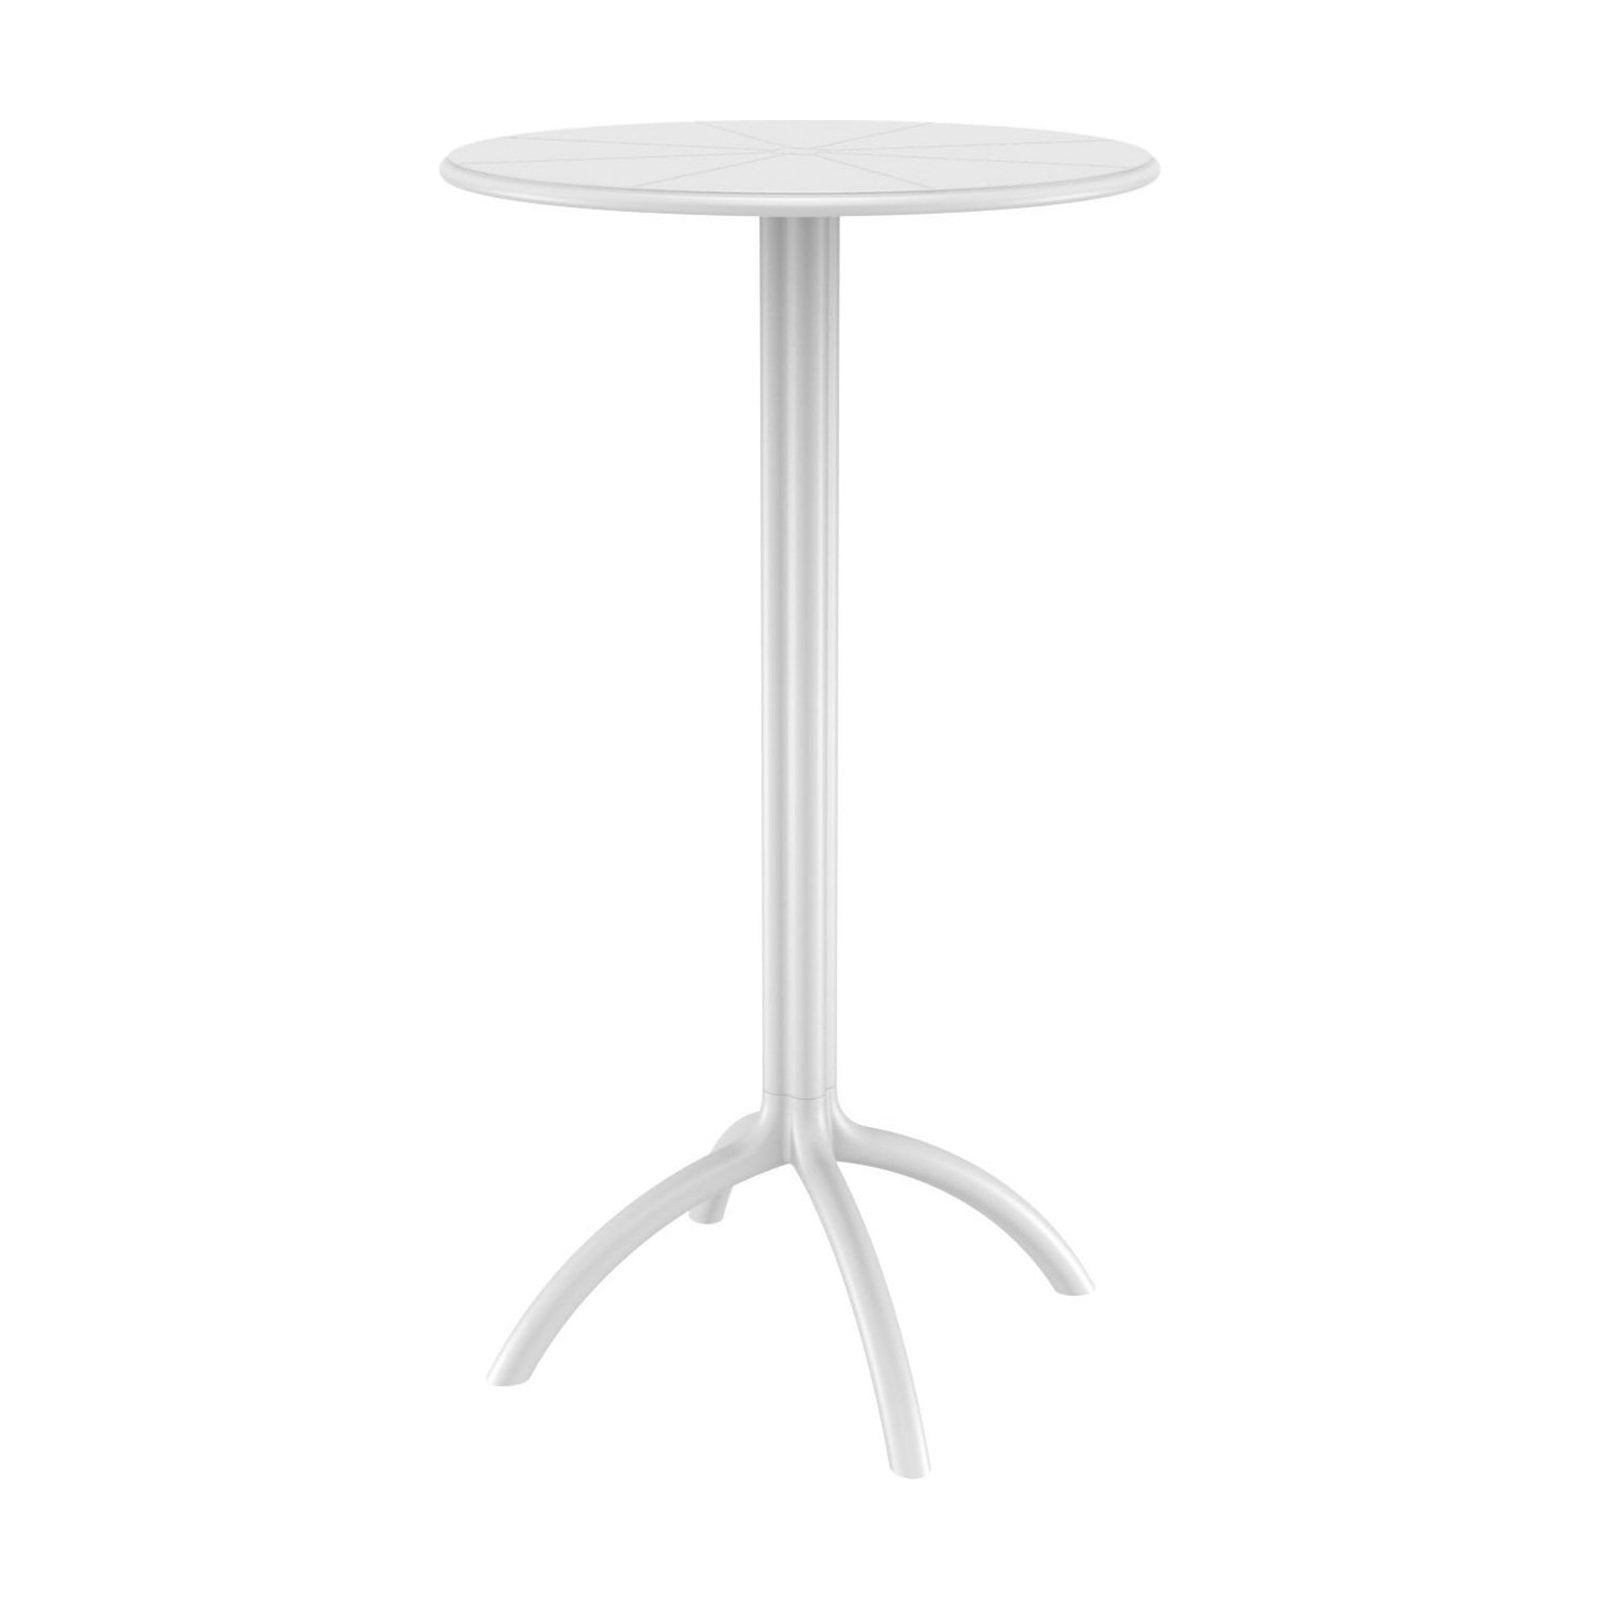 Isp161-whi Octopus Round Bar Table, White